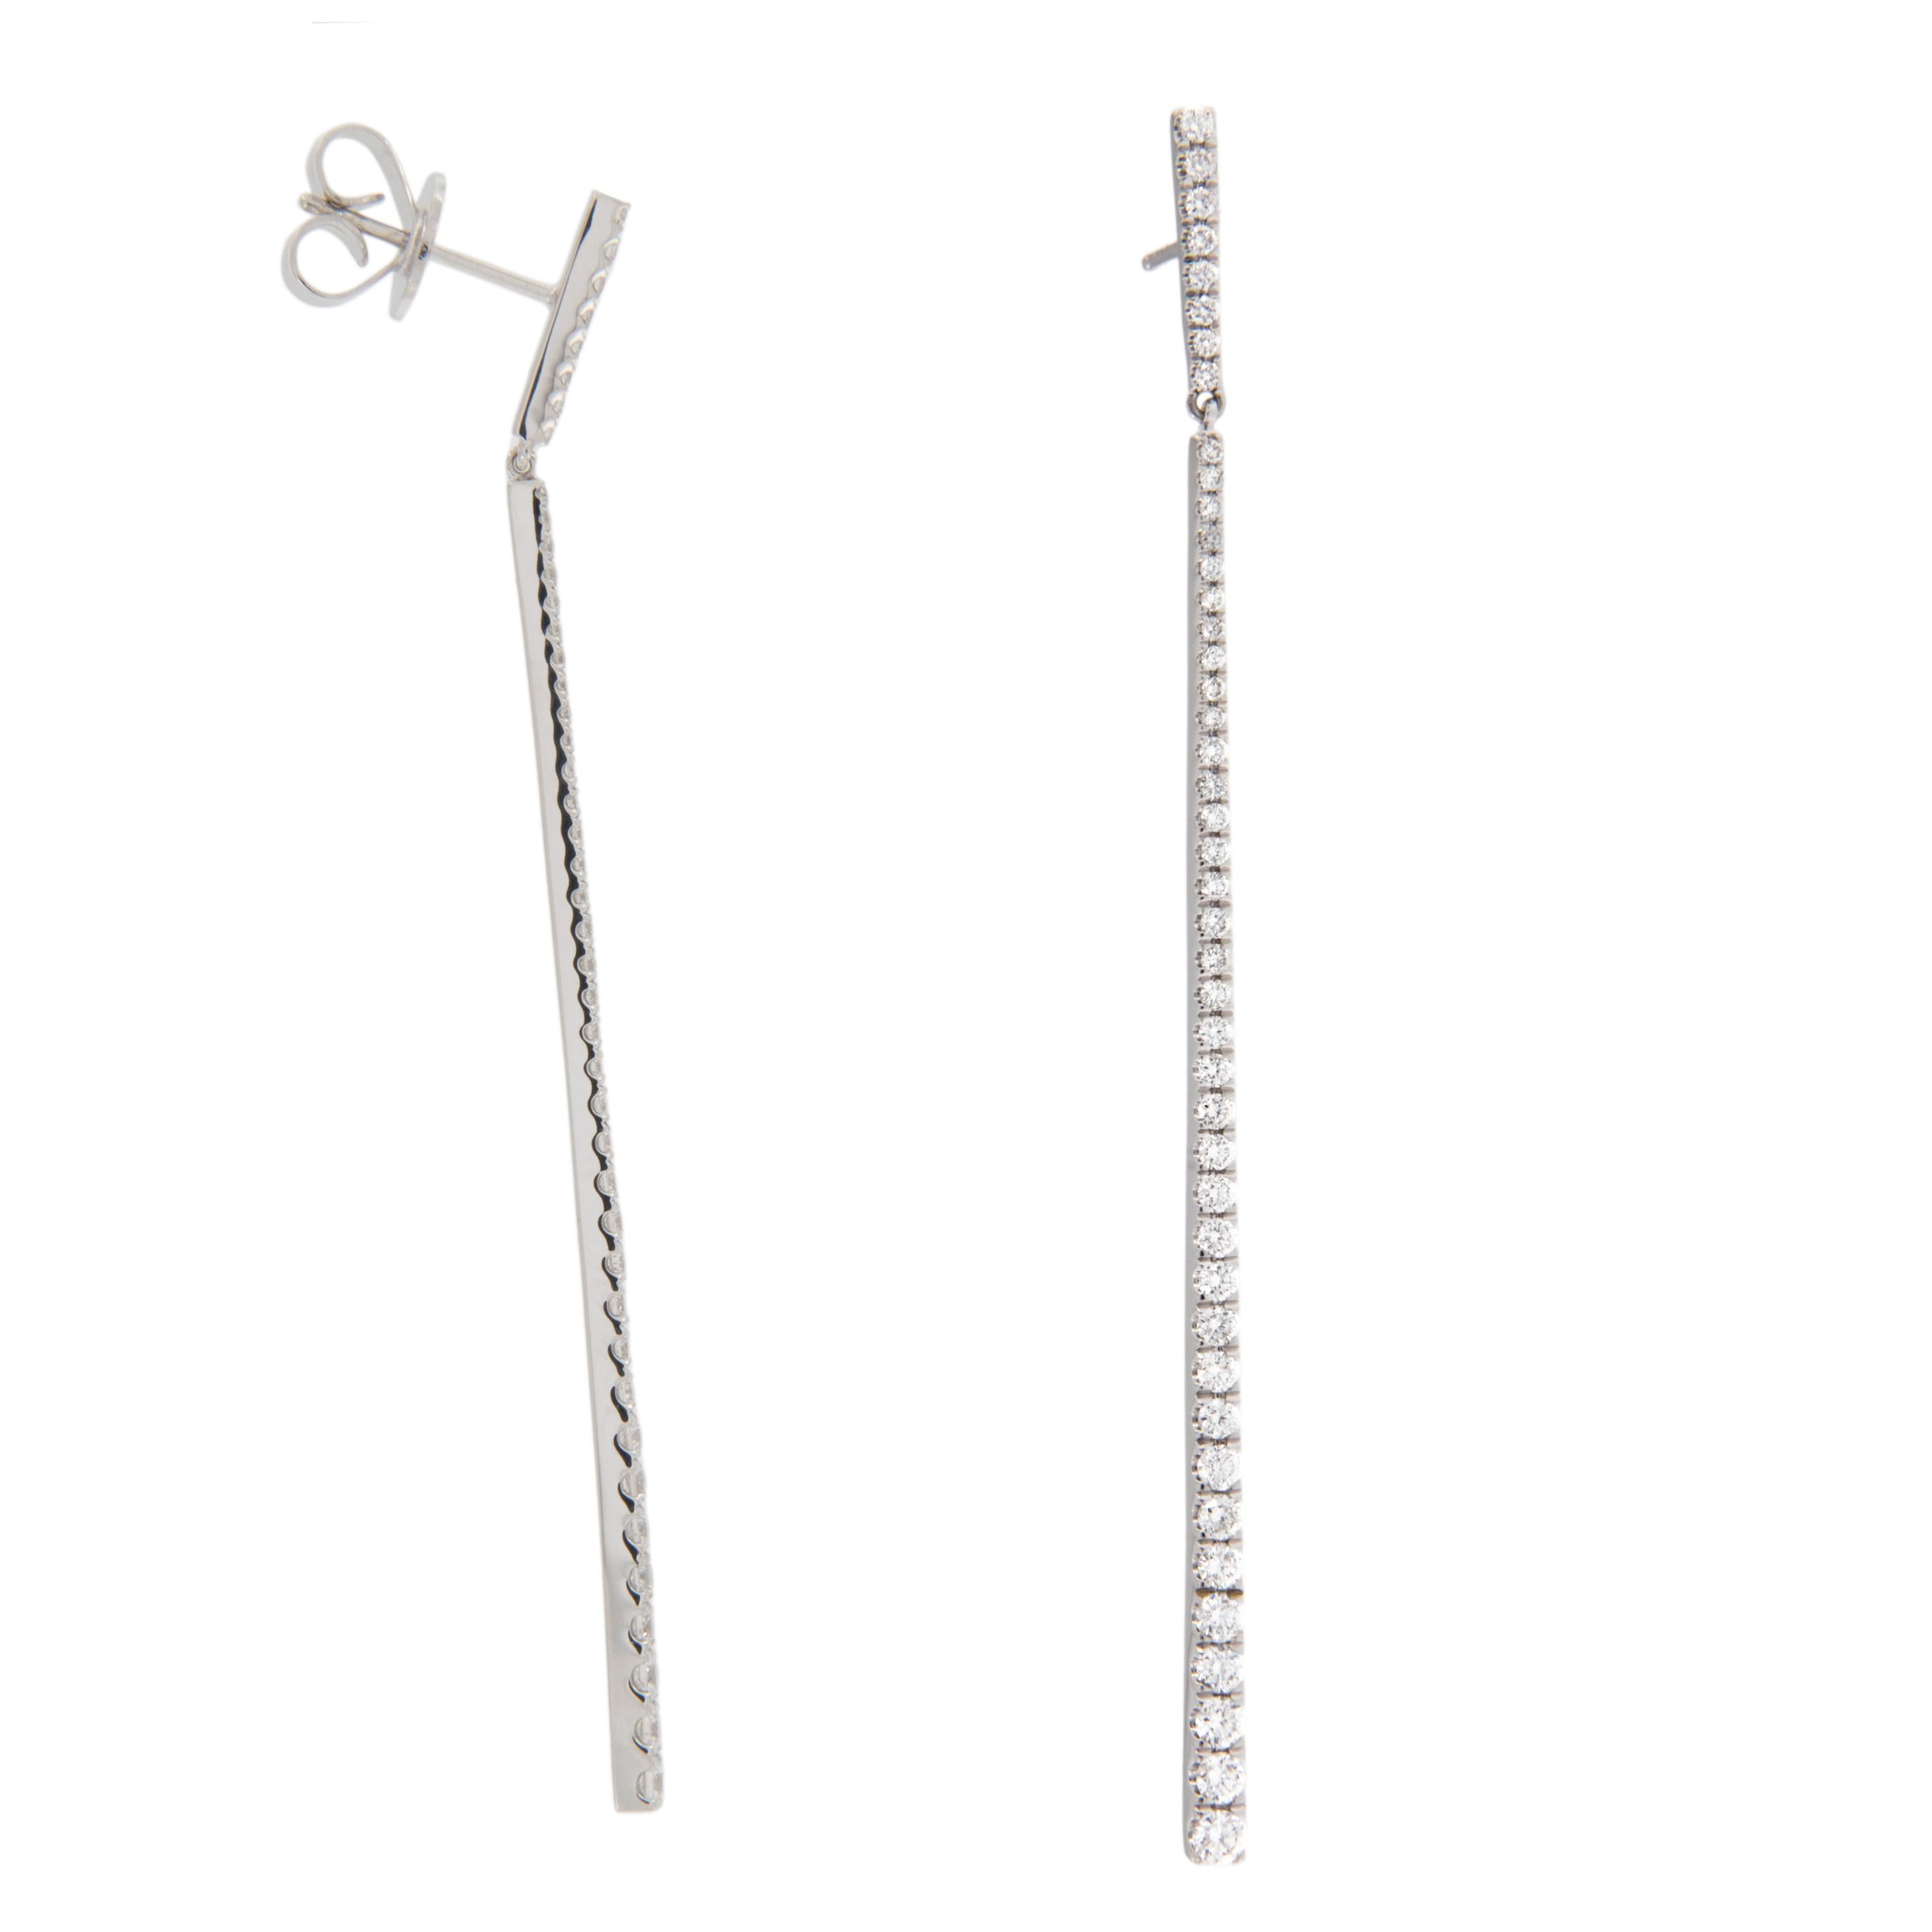 Striking and sleek! These gorgeous earrings are crafted in rich 18 karat white gold accented with 0.97 Cttw fine quality G-VS diamonds in long 2 part dangle stick fashion for a look that moves and sways with you! Made with posts and friction backs